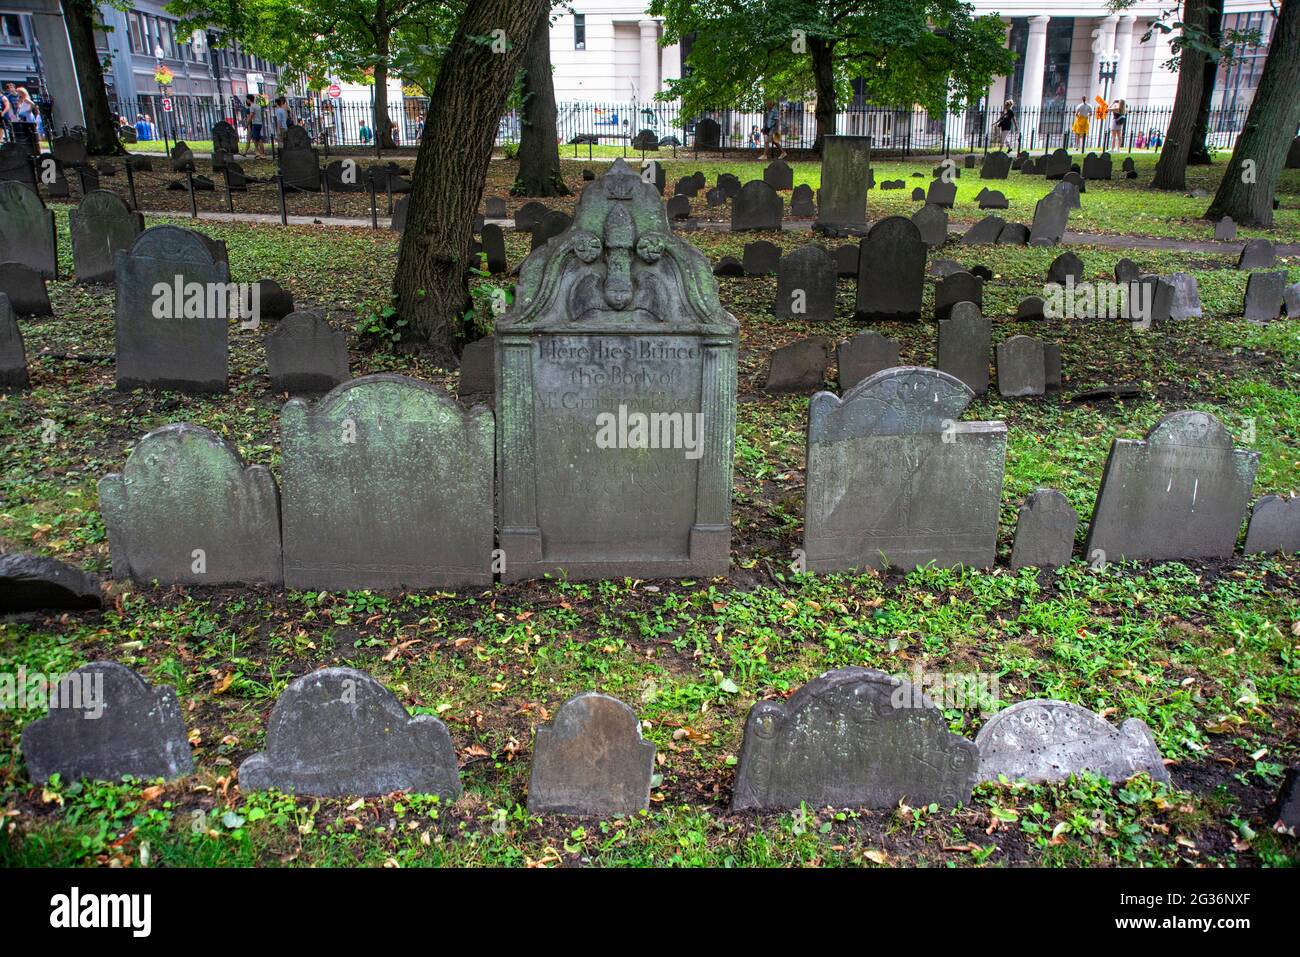 Rows of 18th century tombstones in the historic King's Chapel cemetery Burying Ground, Tremont Street, Boston, Massachusetts, United States. Stock Photo